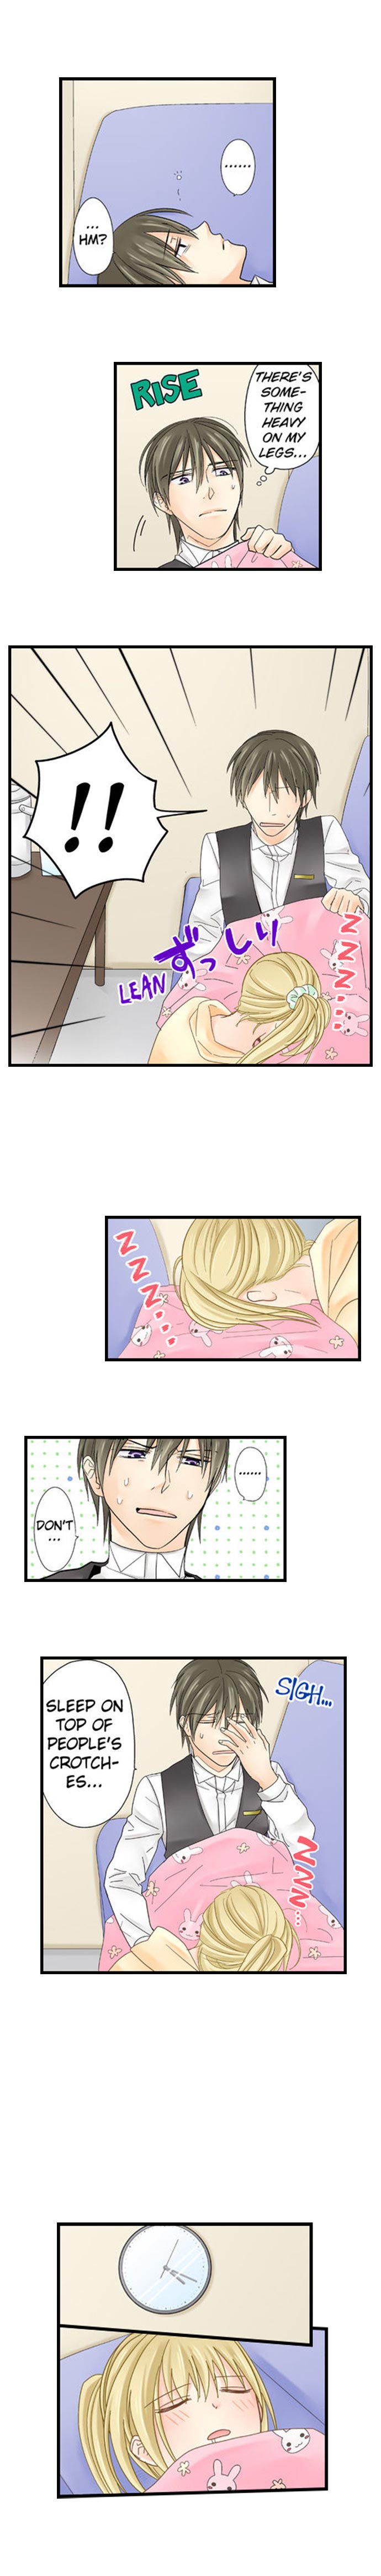 Running a Love Hotel with My Math Teacher - Chapter 14 Page 2